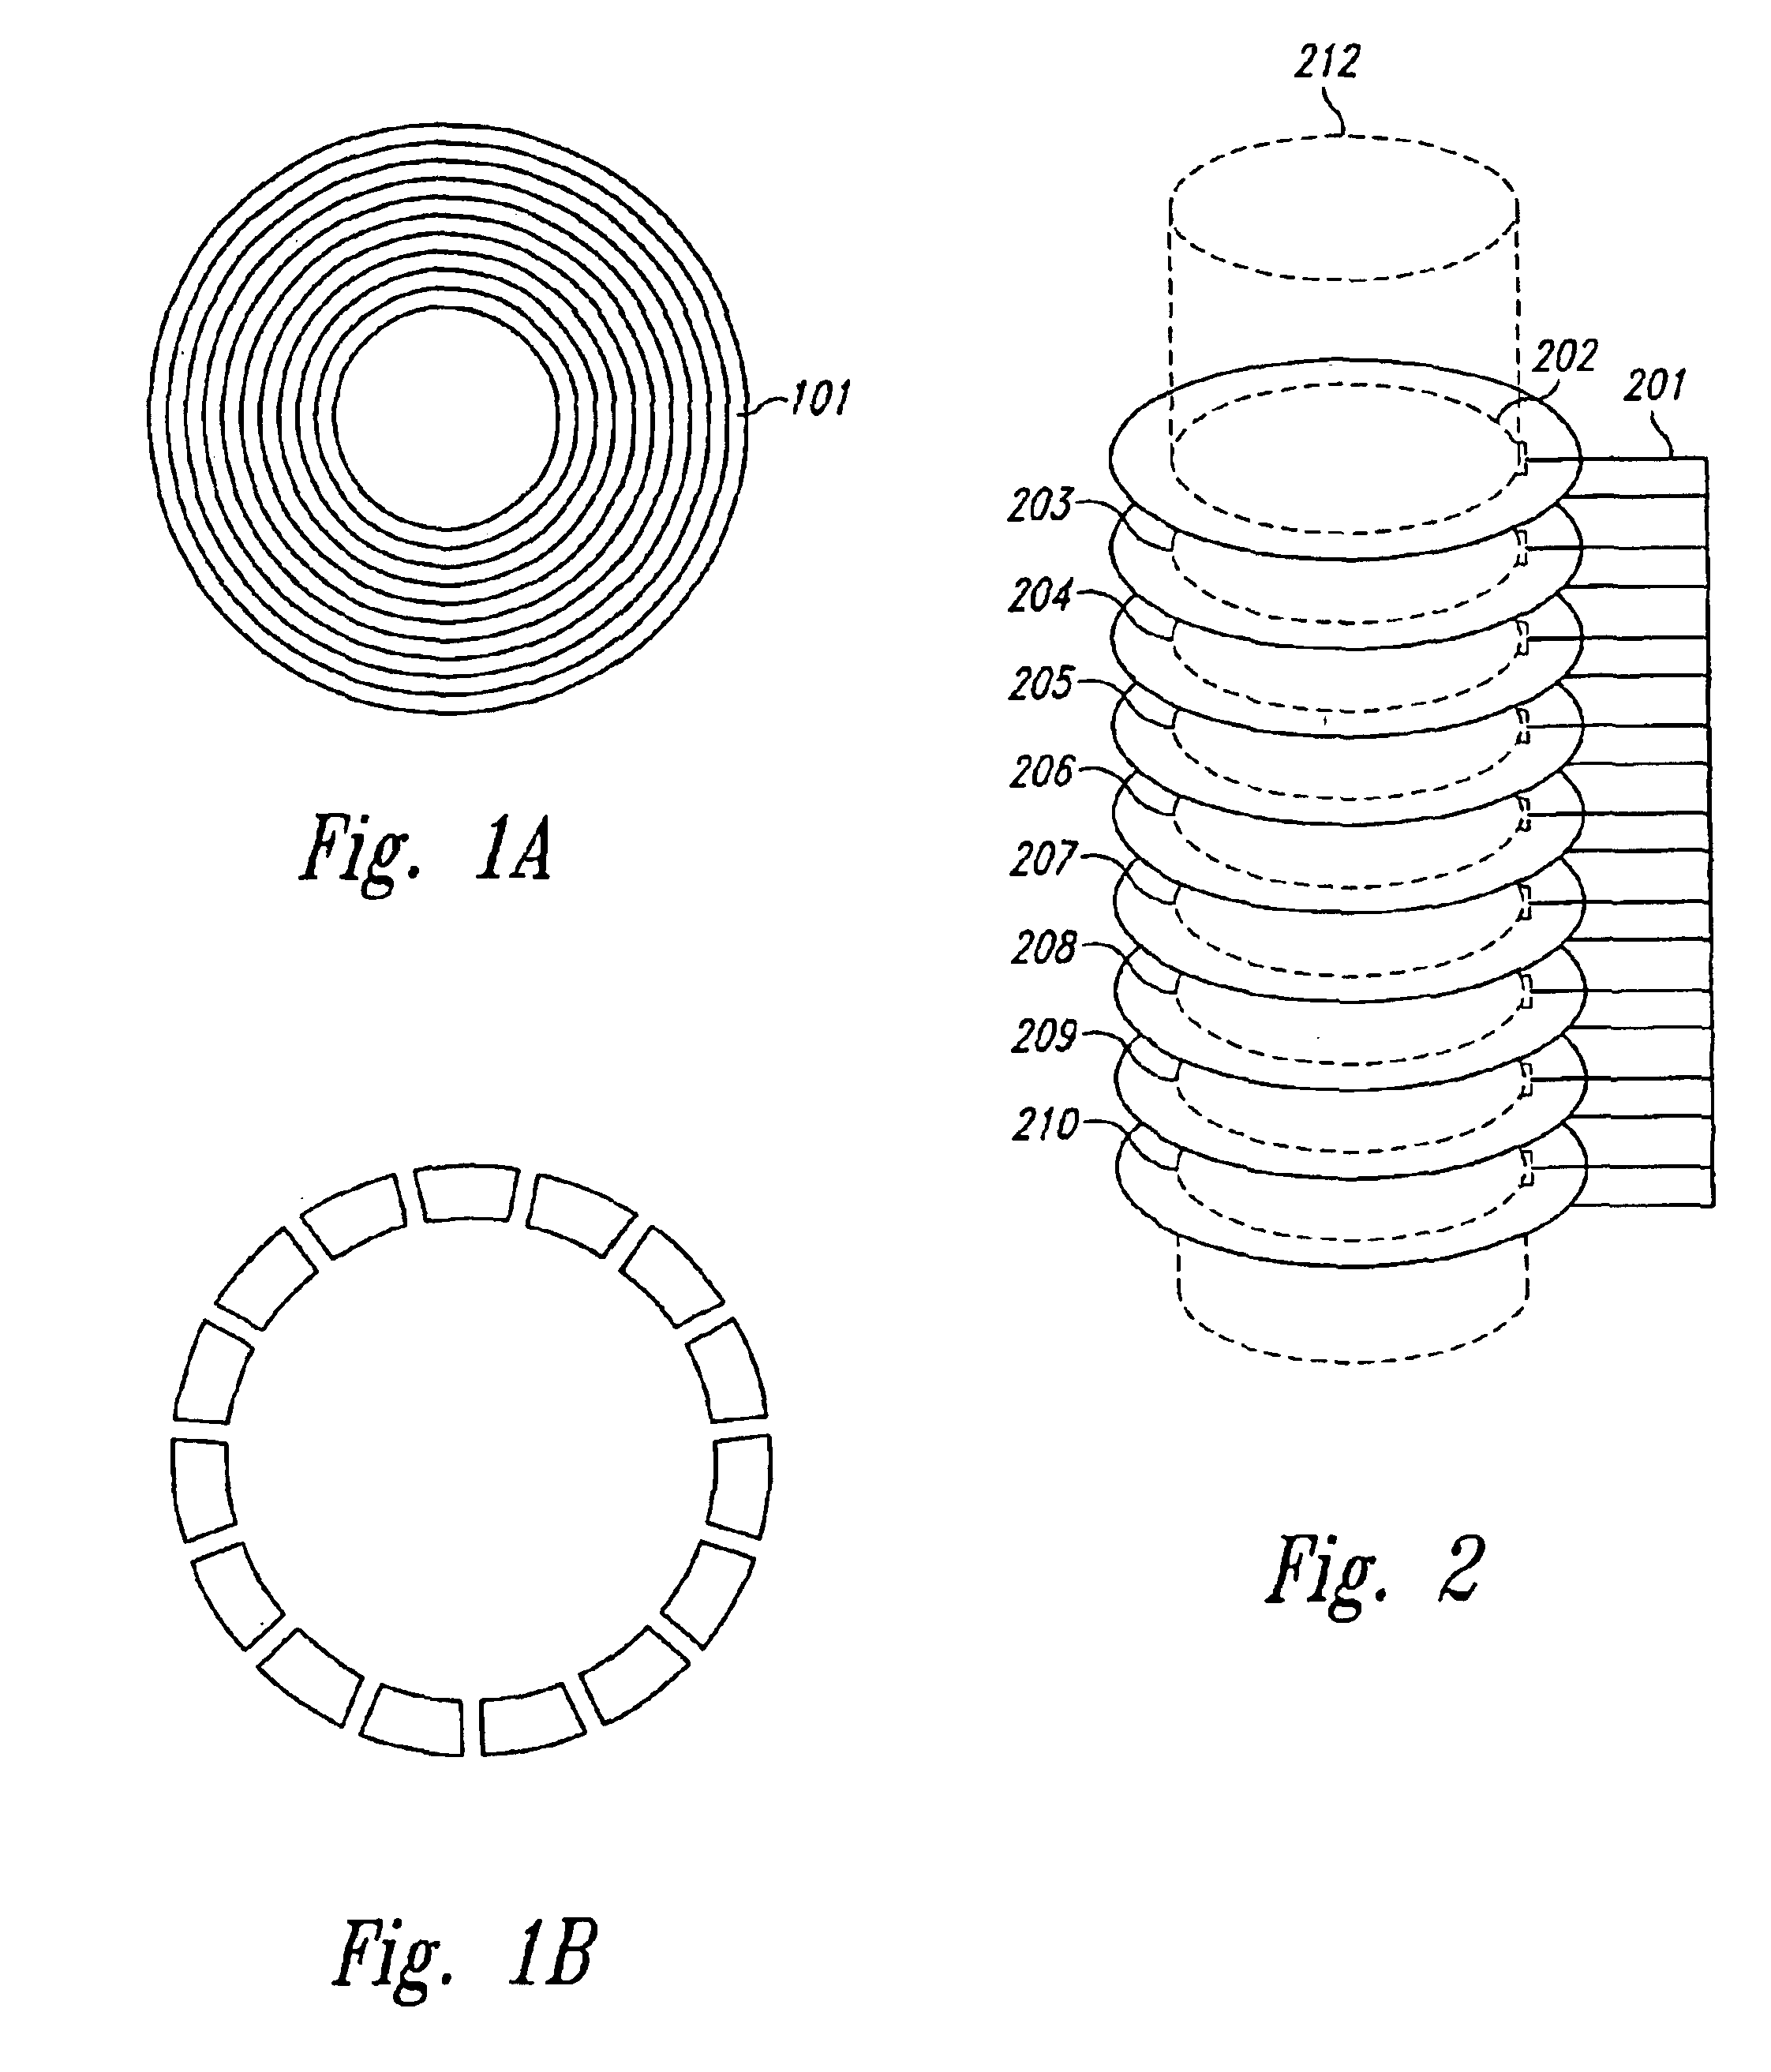 Immediately available, statically allocated, full-logical-unit copy with a transient, snapshot-copy-like intermediate stage